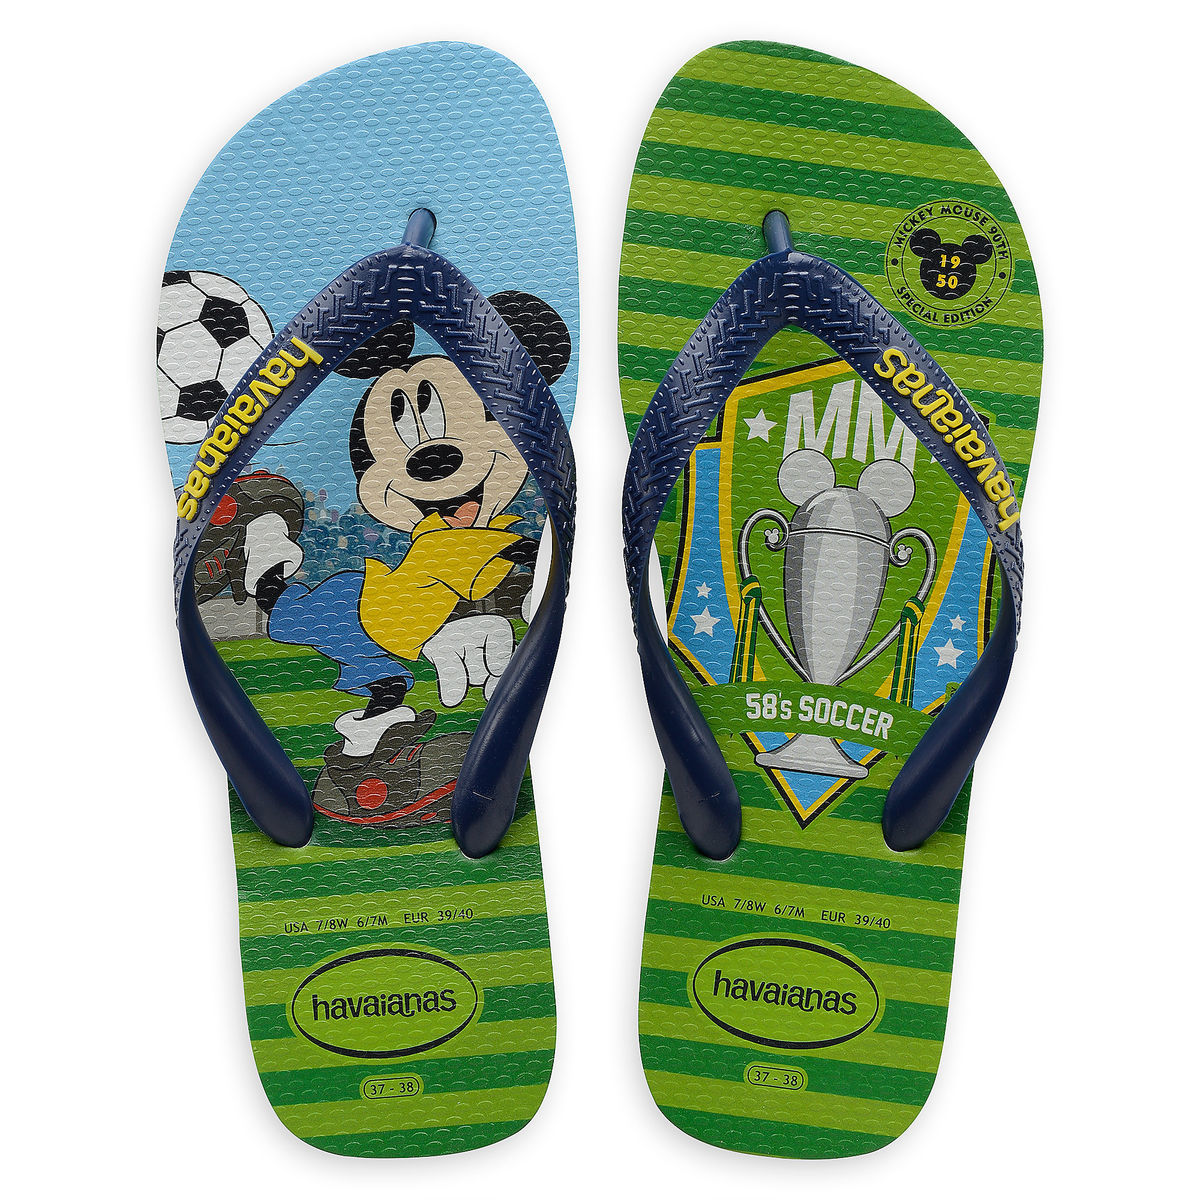 Give Your Feet A Disney Treat With Mickey Mouse Havaianas - Shoes